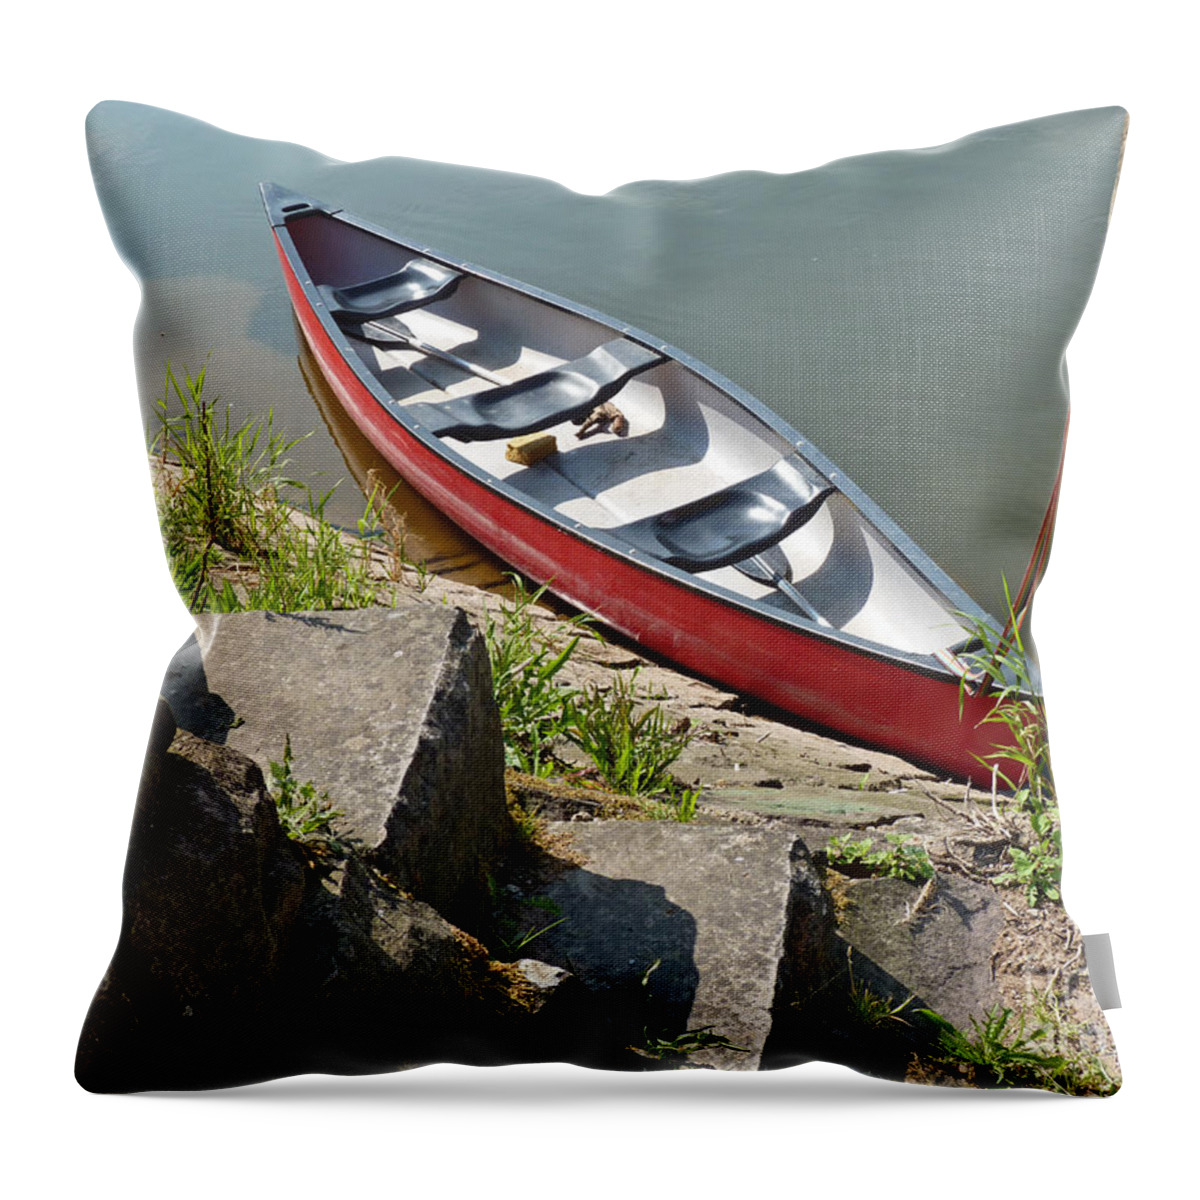 Abandoned Throw Pillow featuring the photograph Abandoned Boat At The Quay by Eva-Maria Di Bella